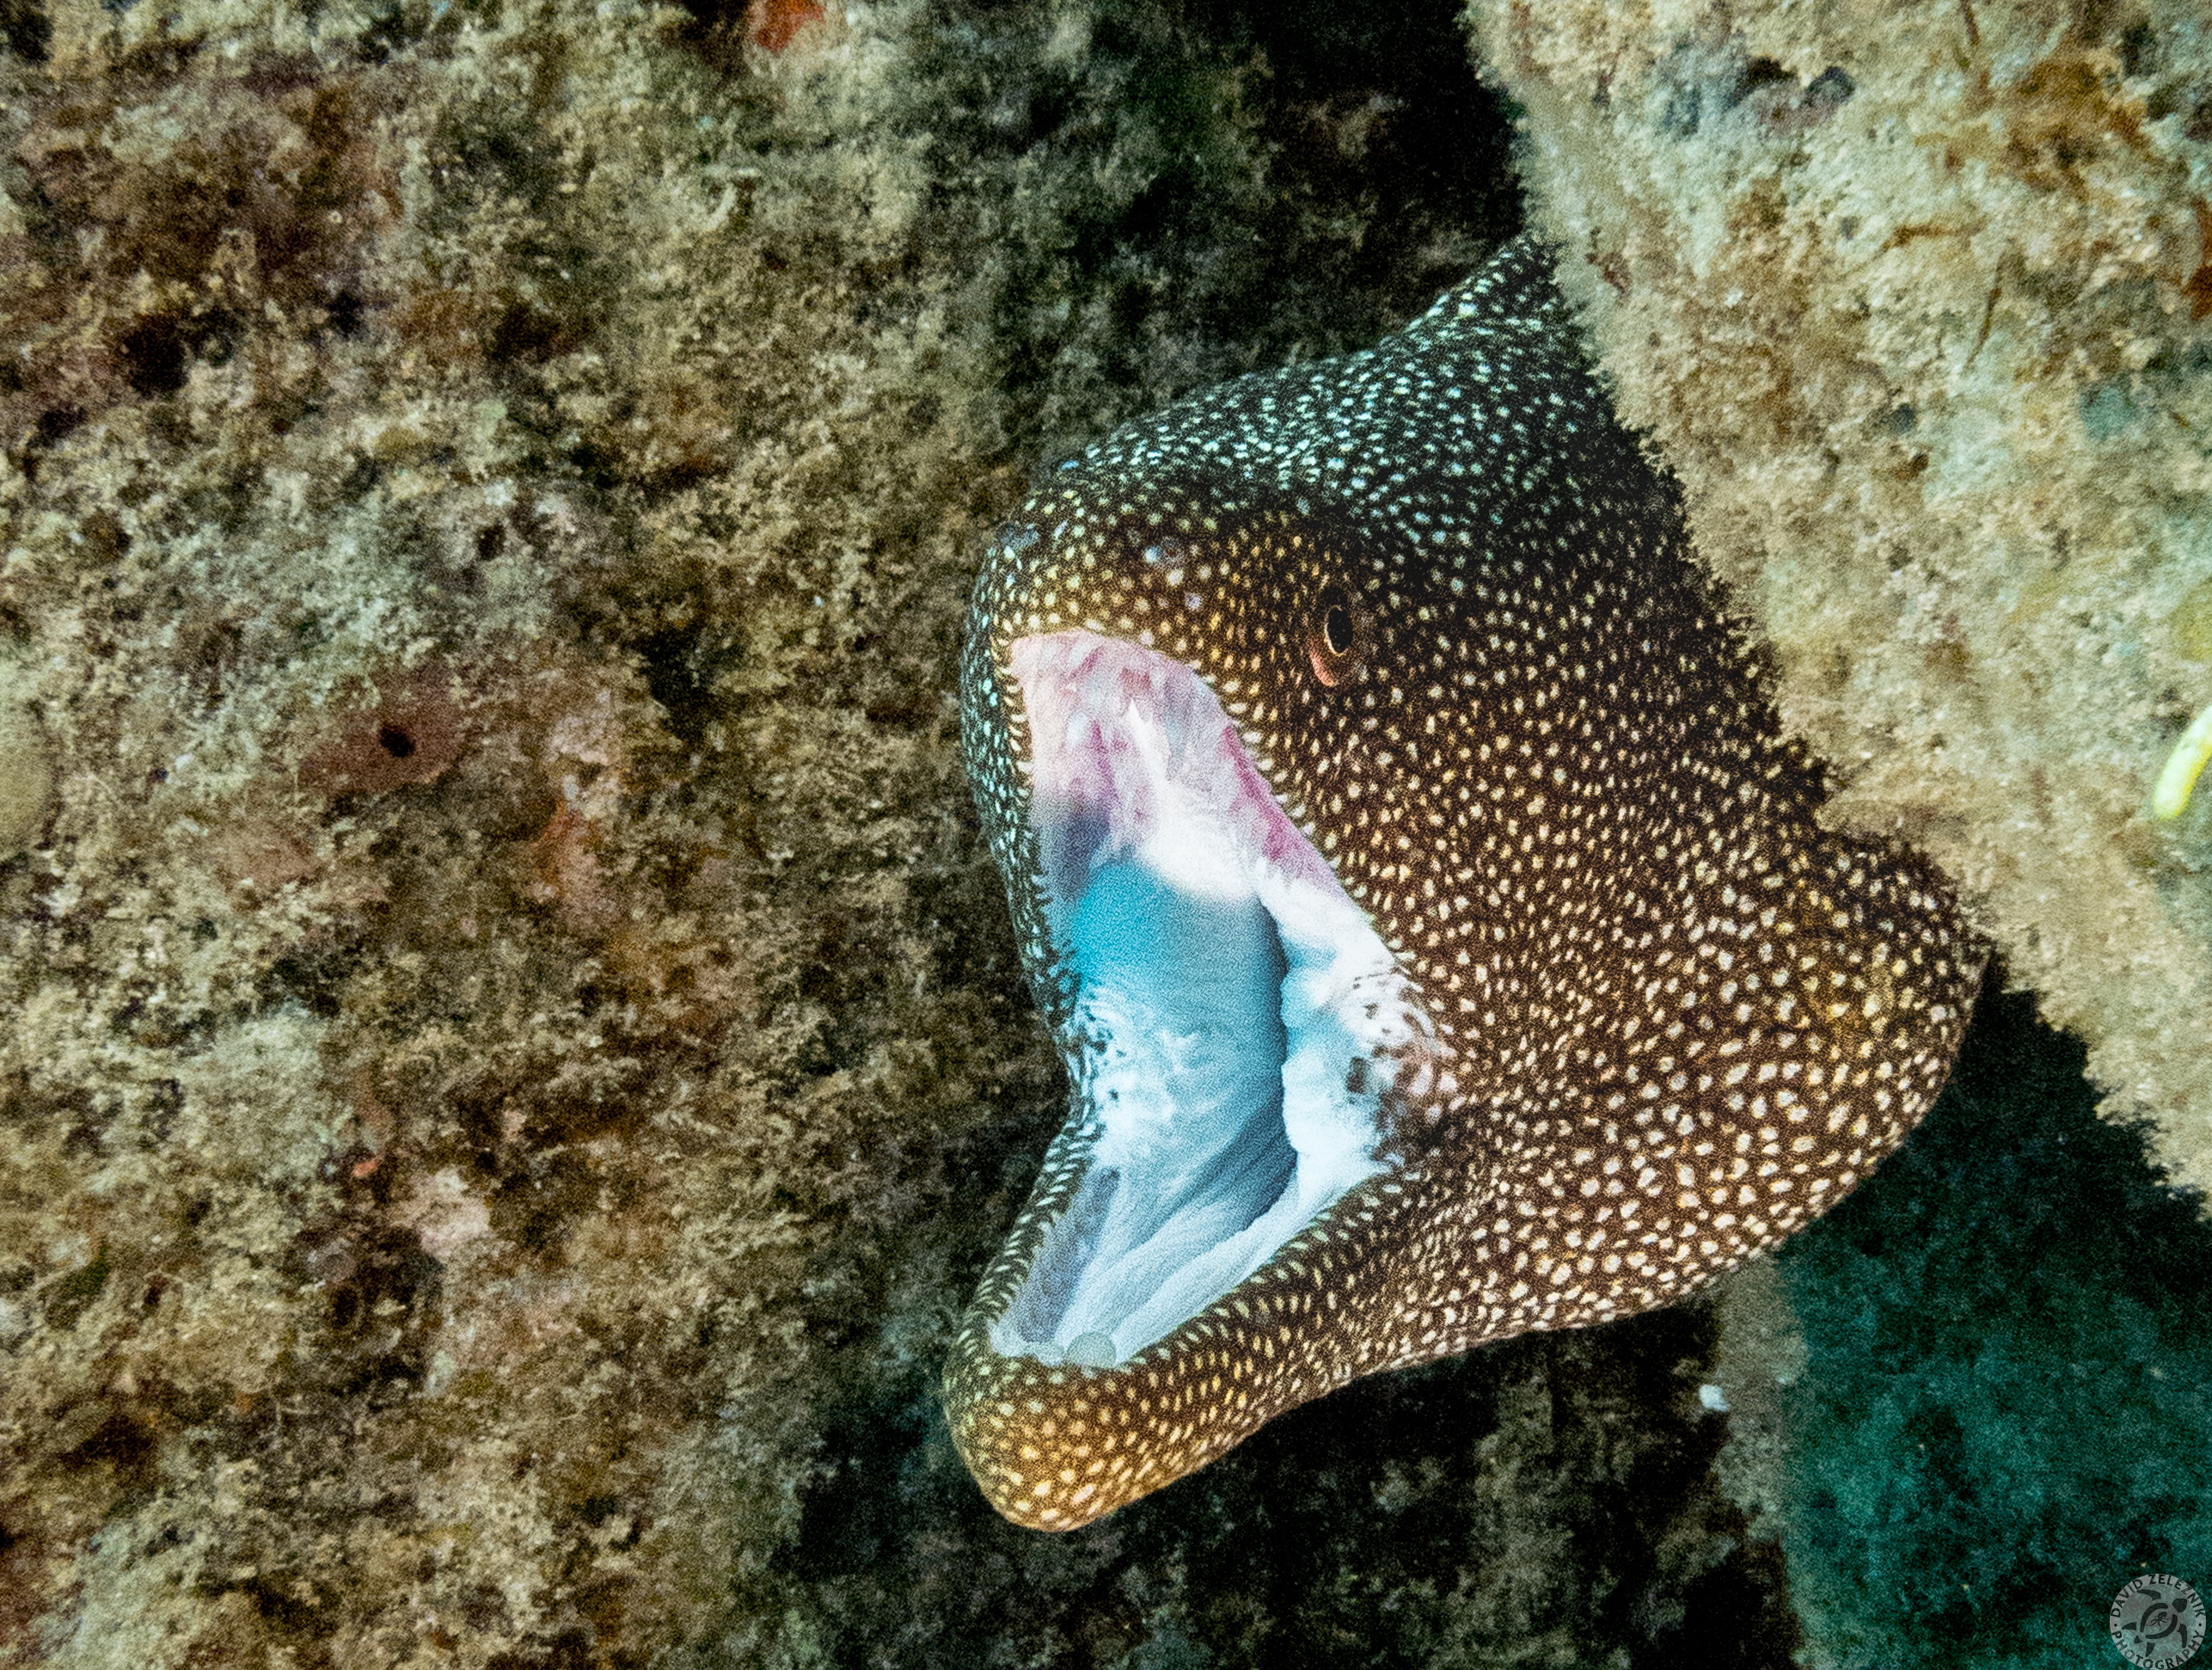 This snaggle-toothed Whitemouth Moray shows how it gets its name